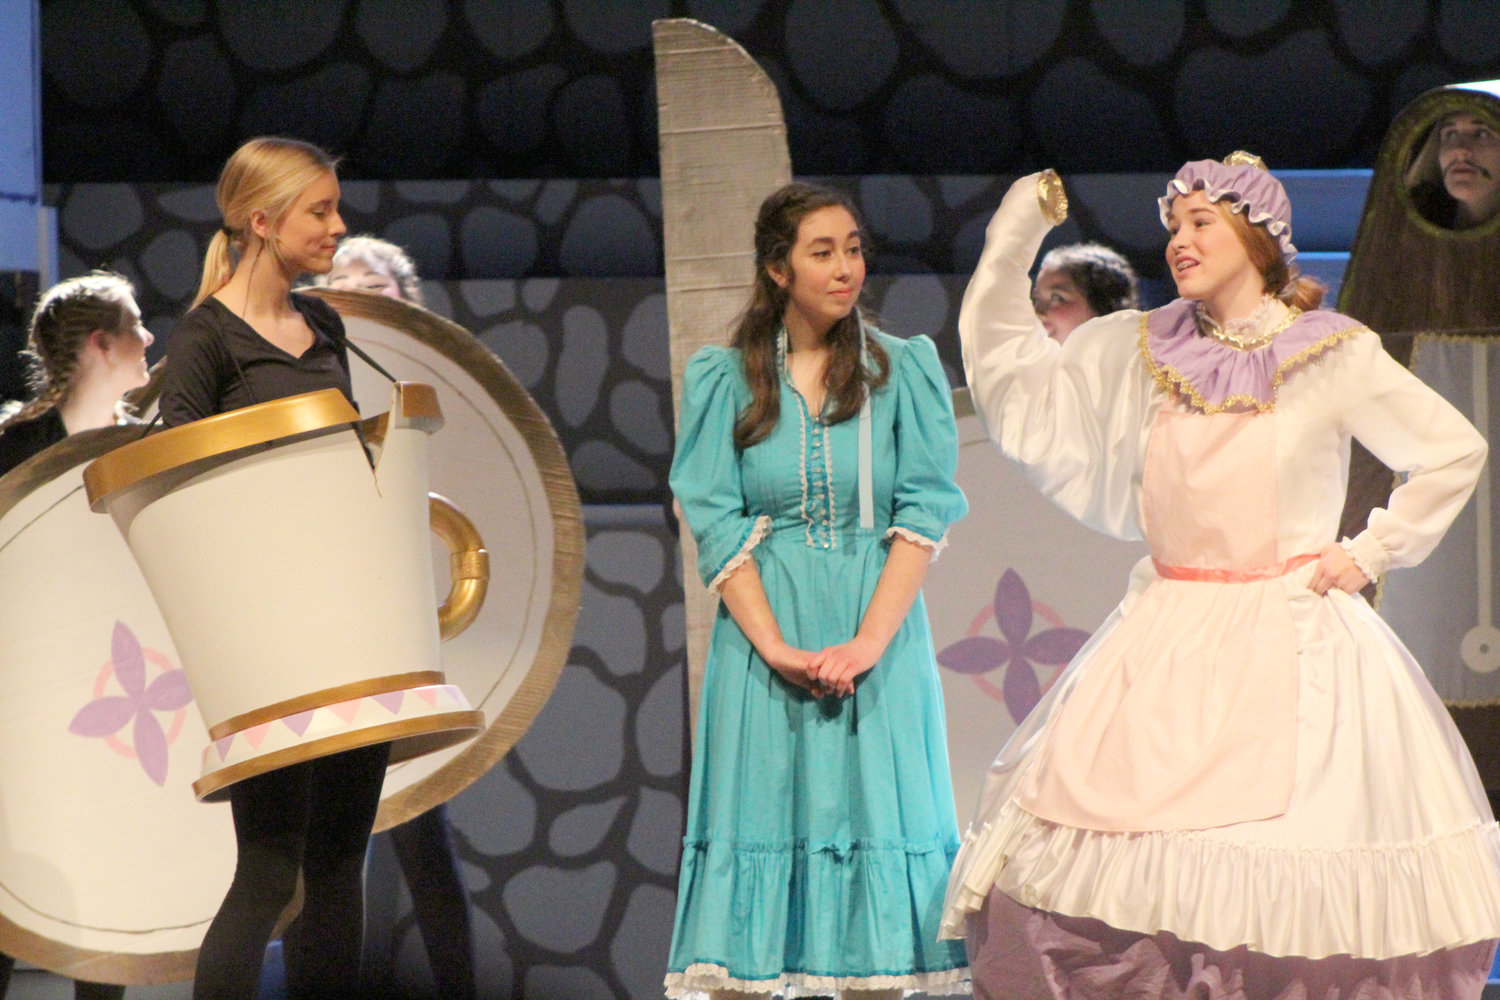 Hillcrest Academy presented the musical Beauty and the Beast Nov. 9 and 10.